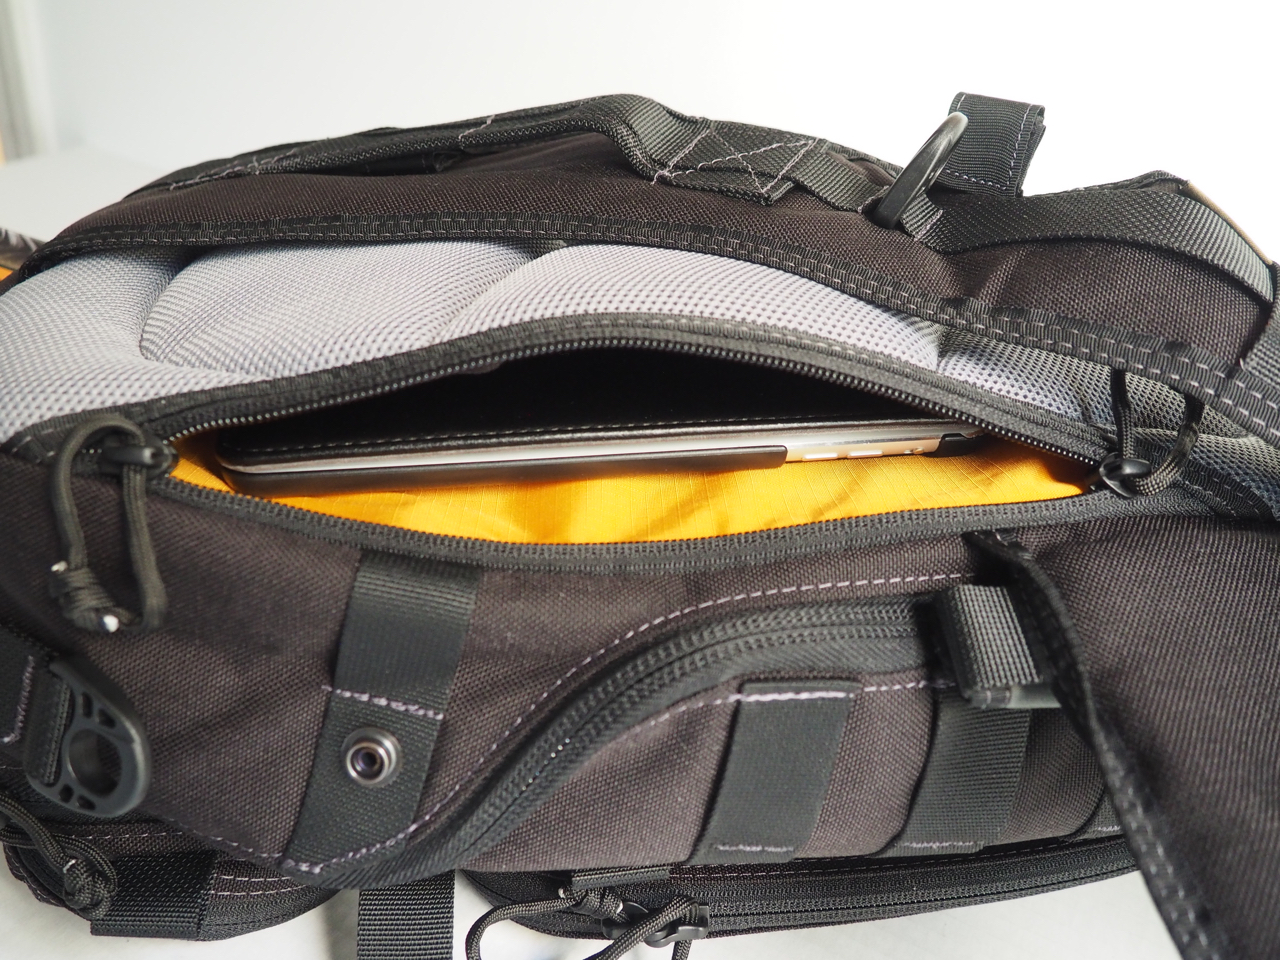 Concealed back pocket, good for an iPad Air